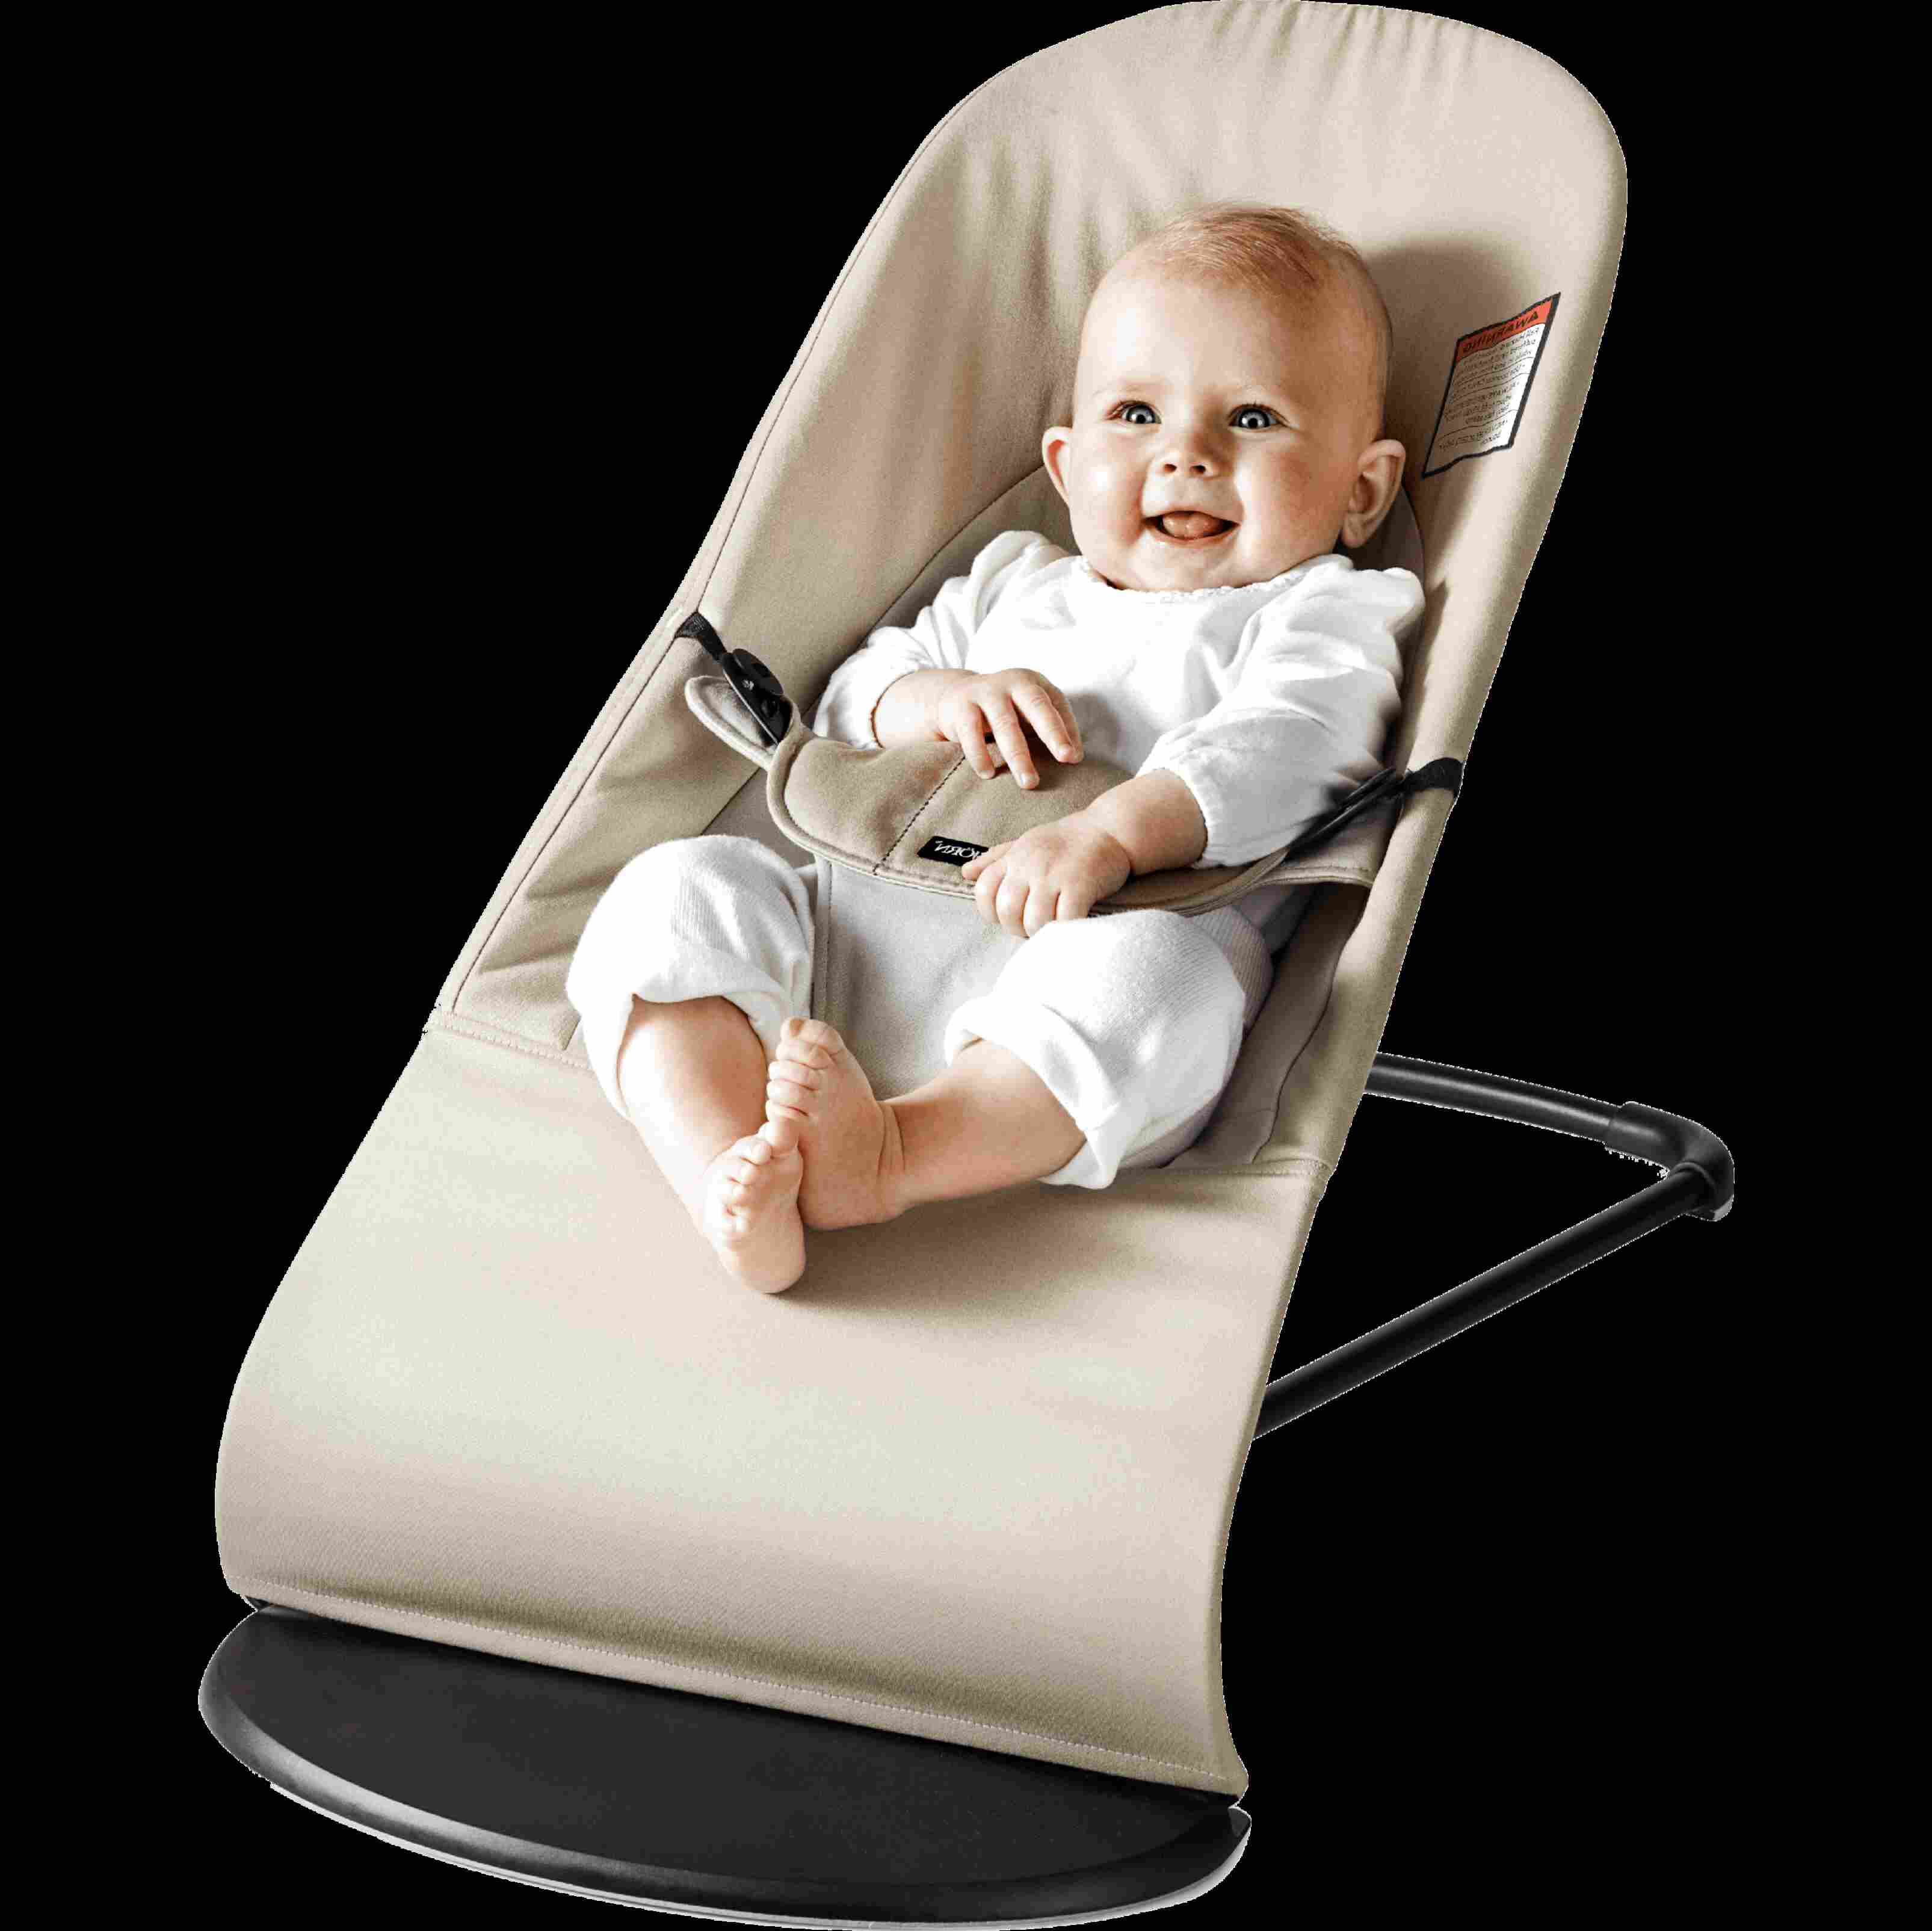 Second hand Babybjorn Bouncer in Ireland | 56 used Babybjorn Bouncers